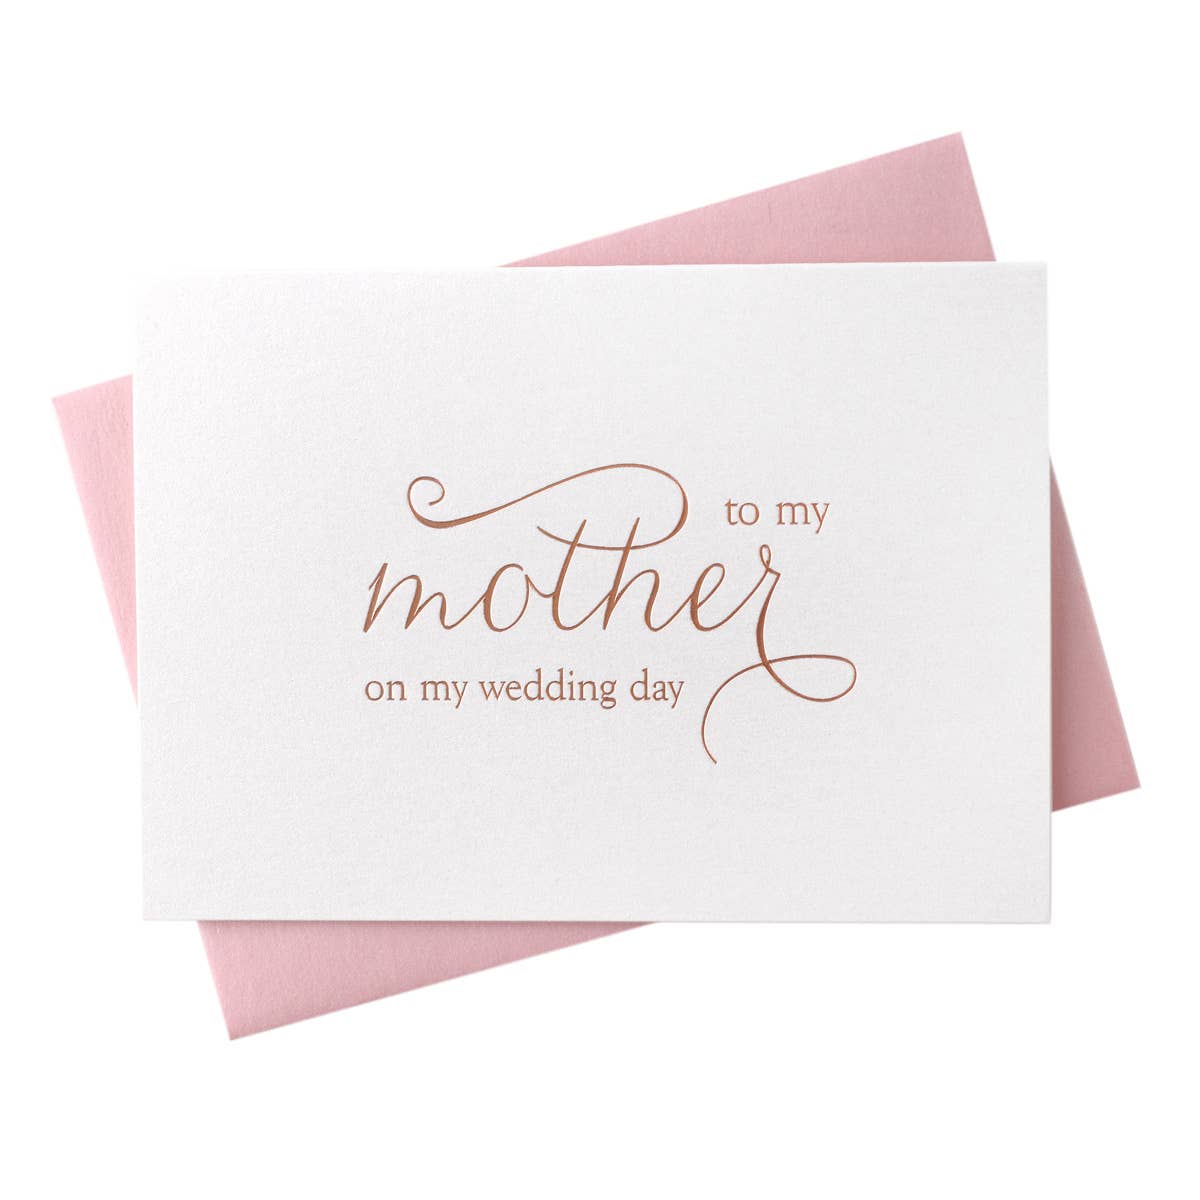 Foil To My Mother on My Wedding Day Card to Mom from Bride